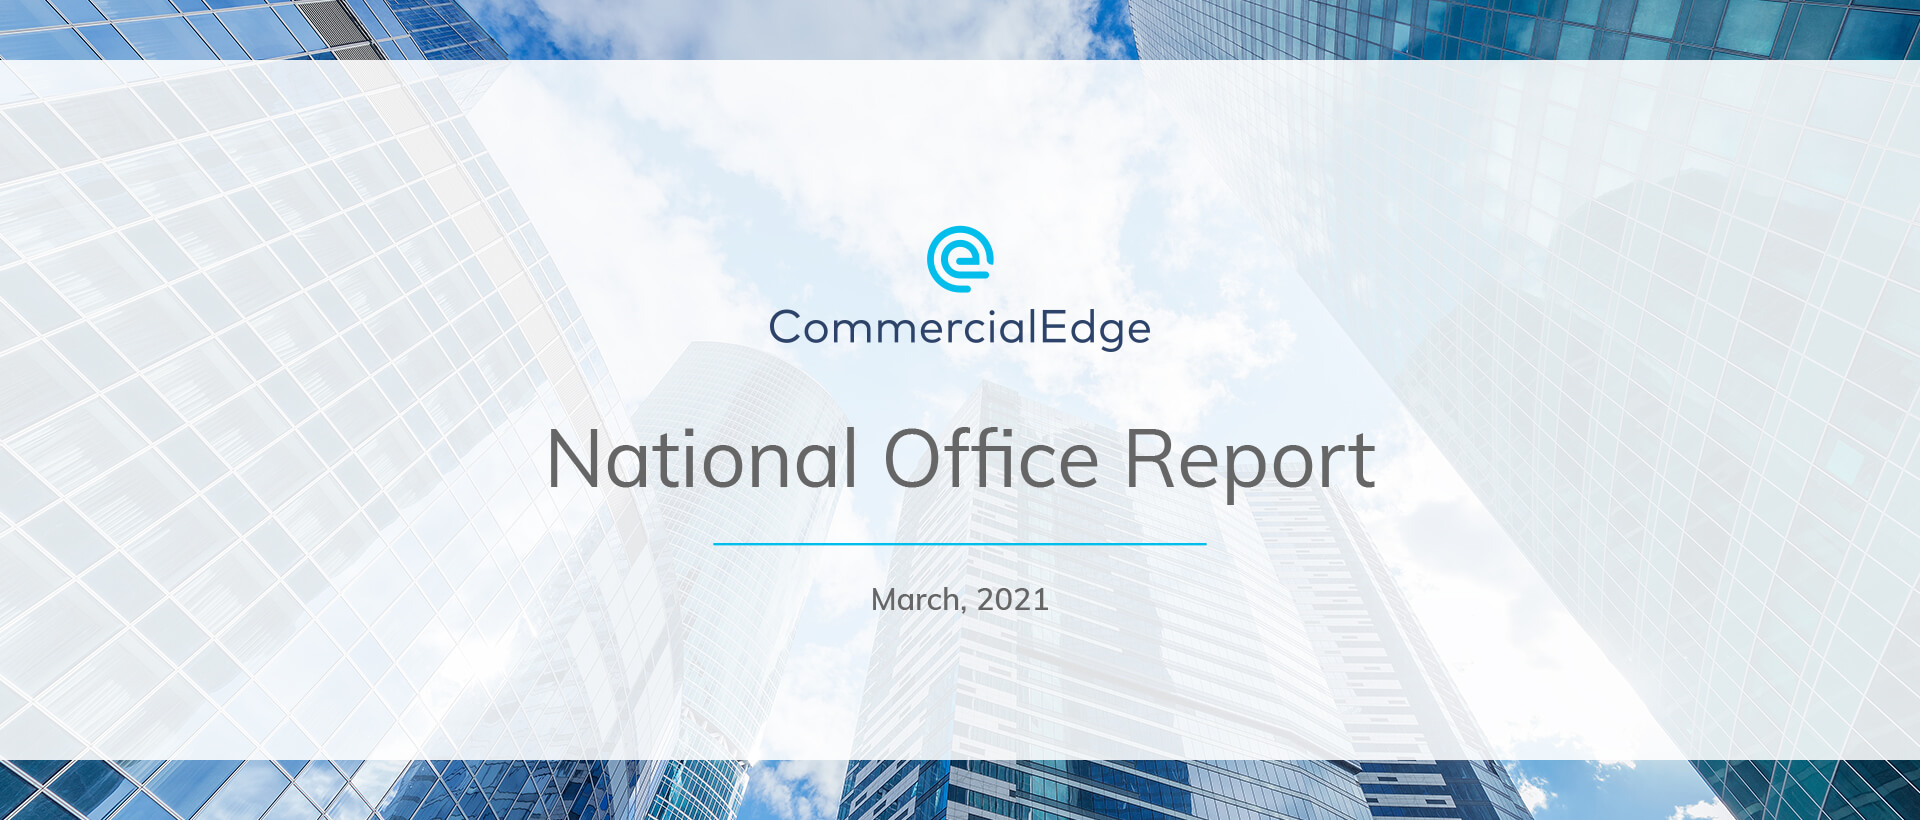 CommercialEdge National Office Report March 2021